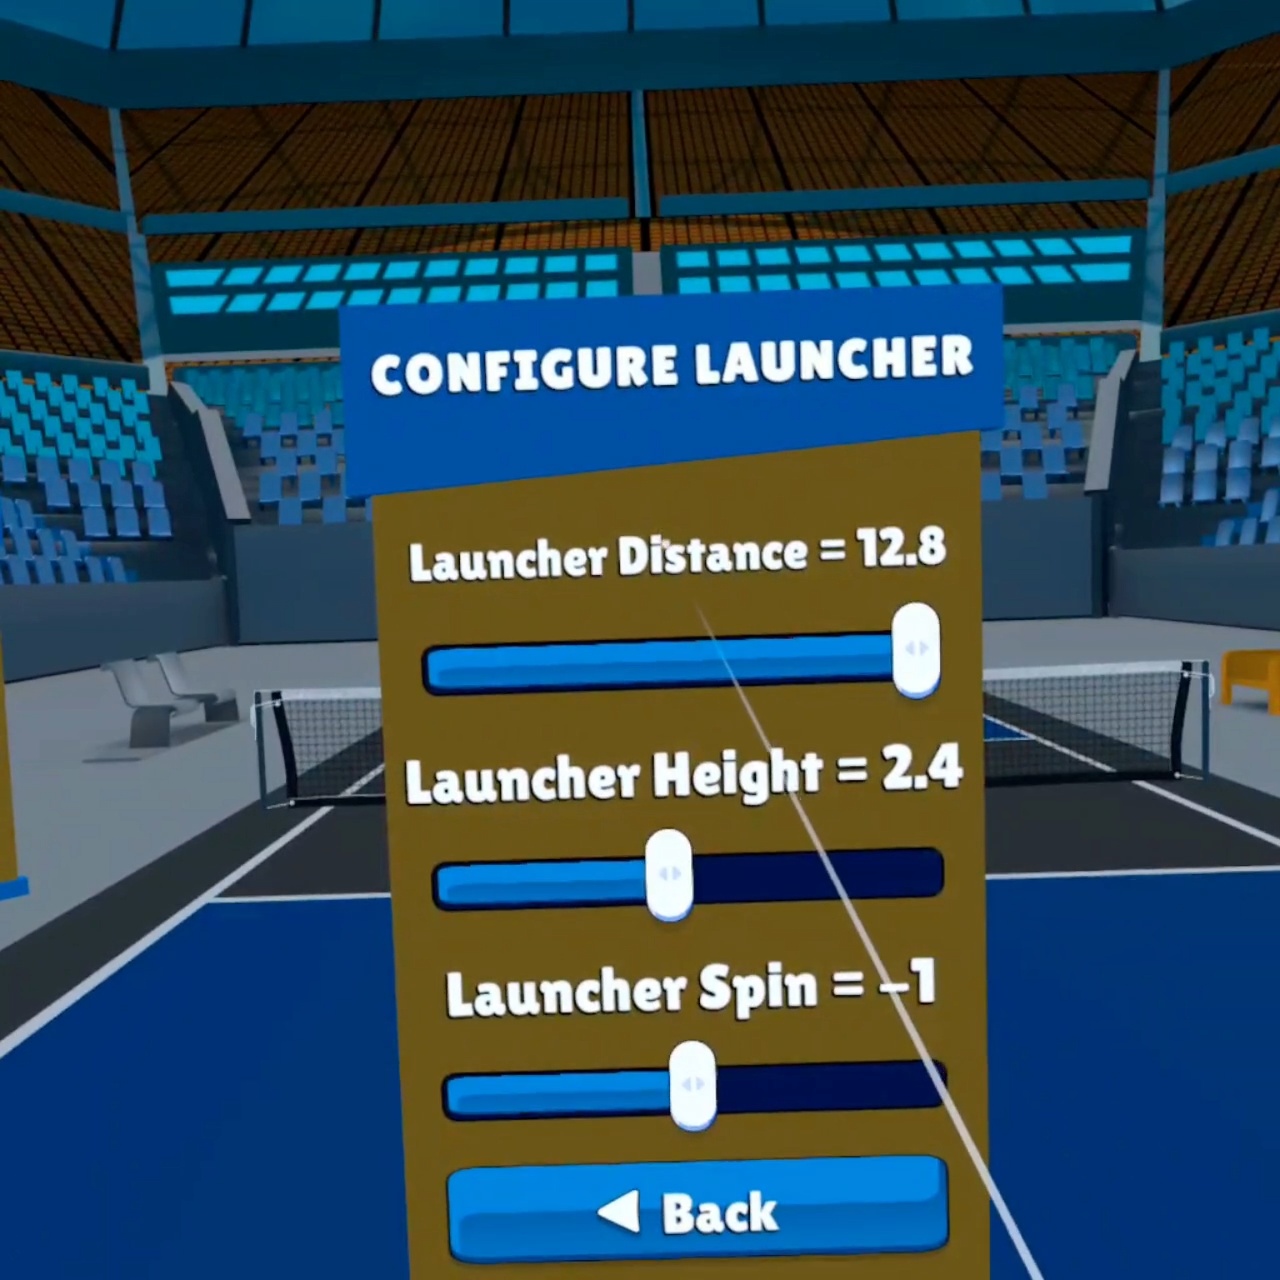 Configure Launcher Menu displaying Launcher Distance, Launcher Height, and Launcher Spin values.